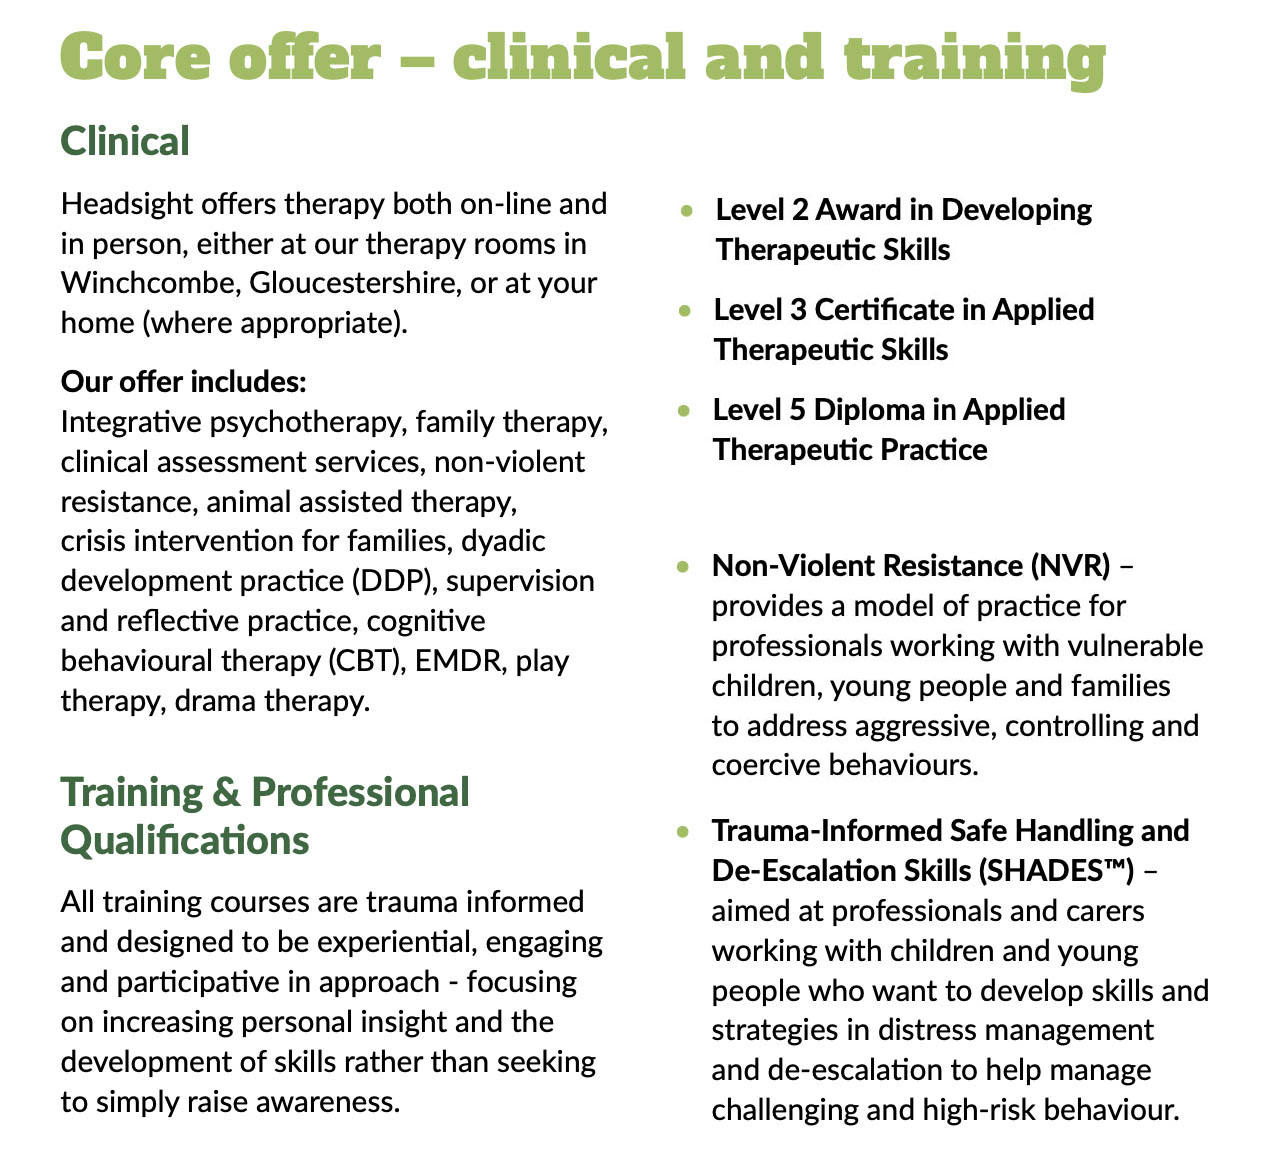 Core offer - Clinical and Training